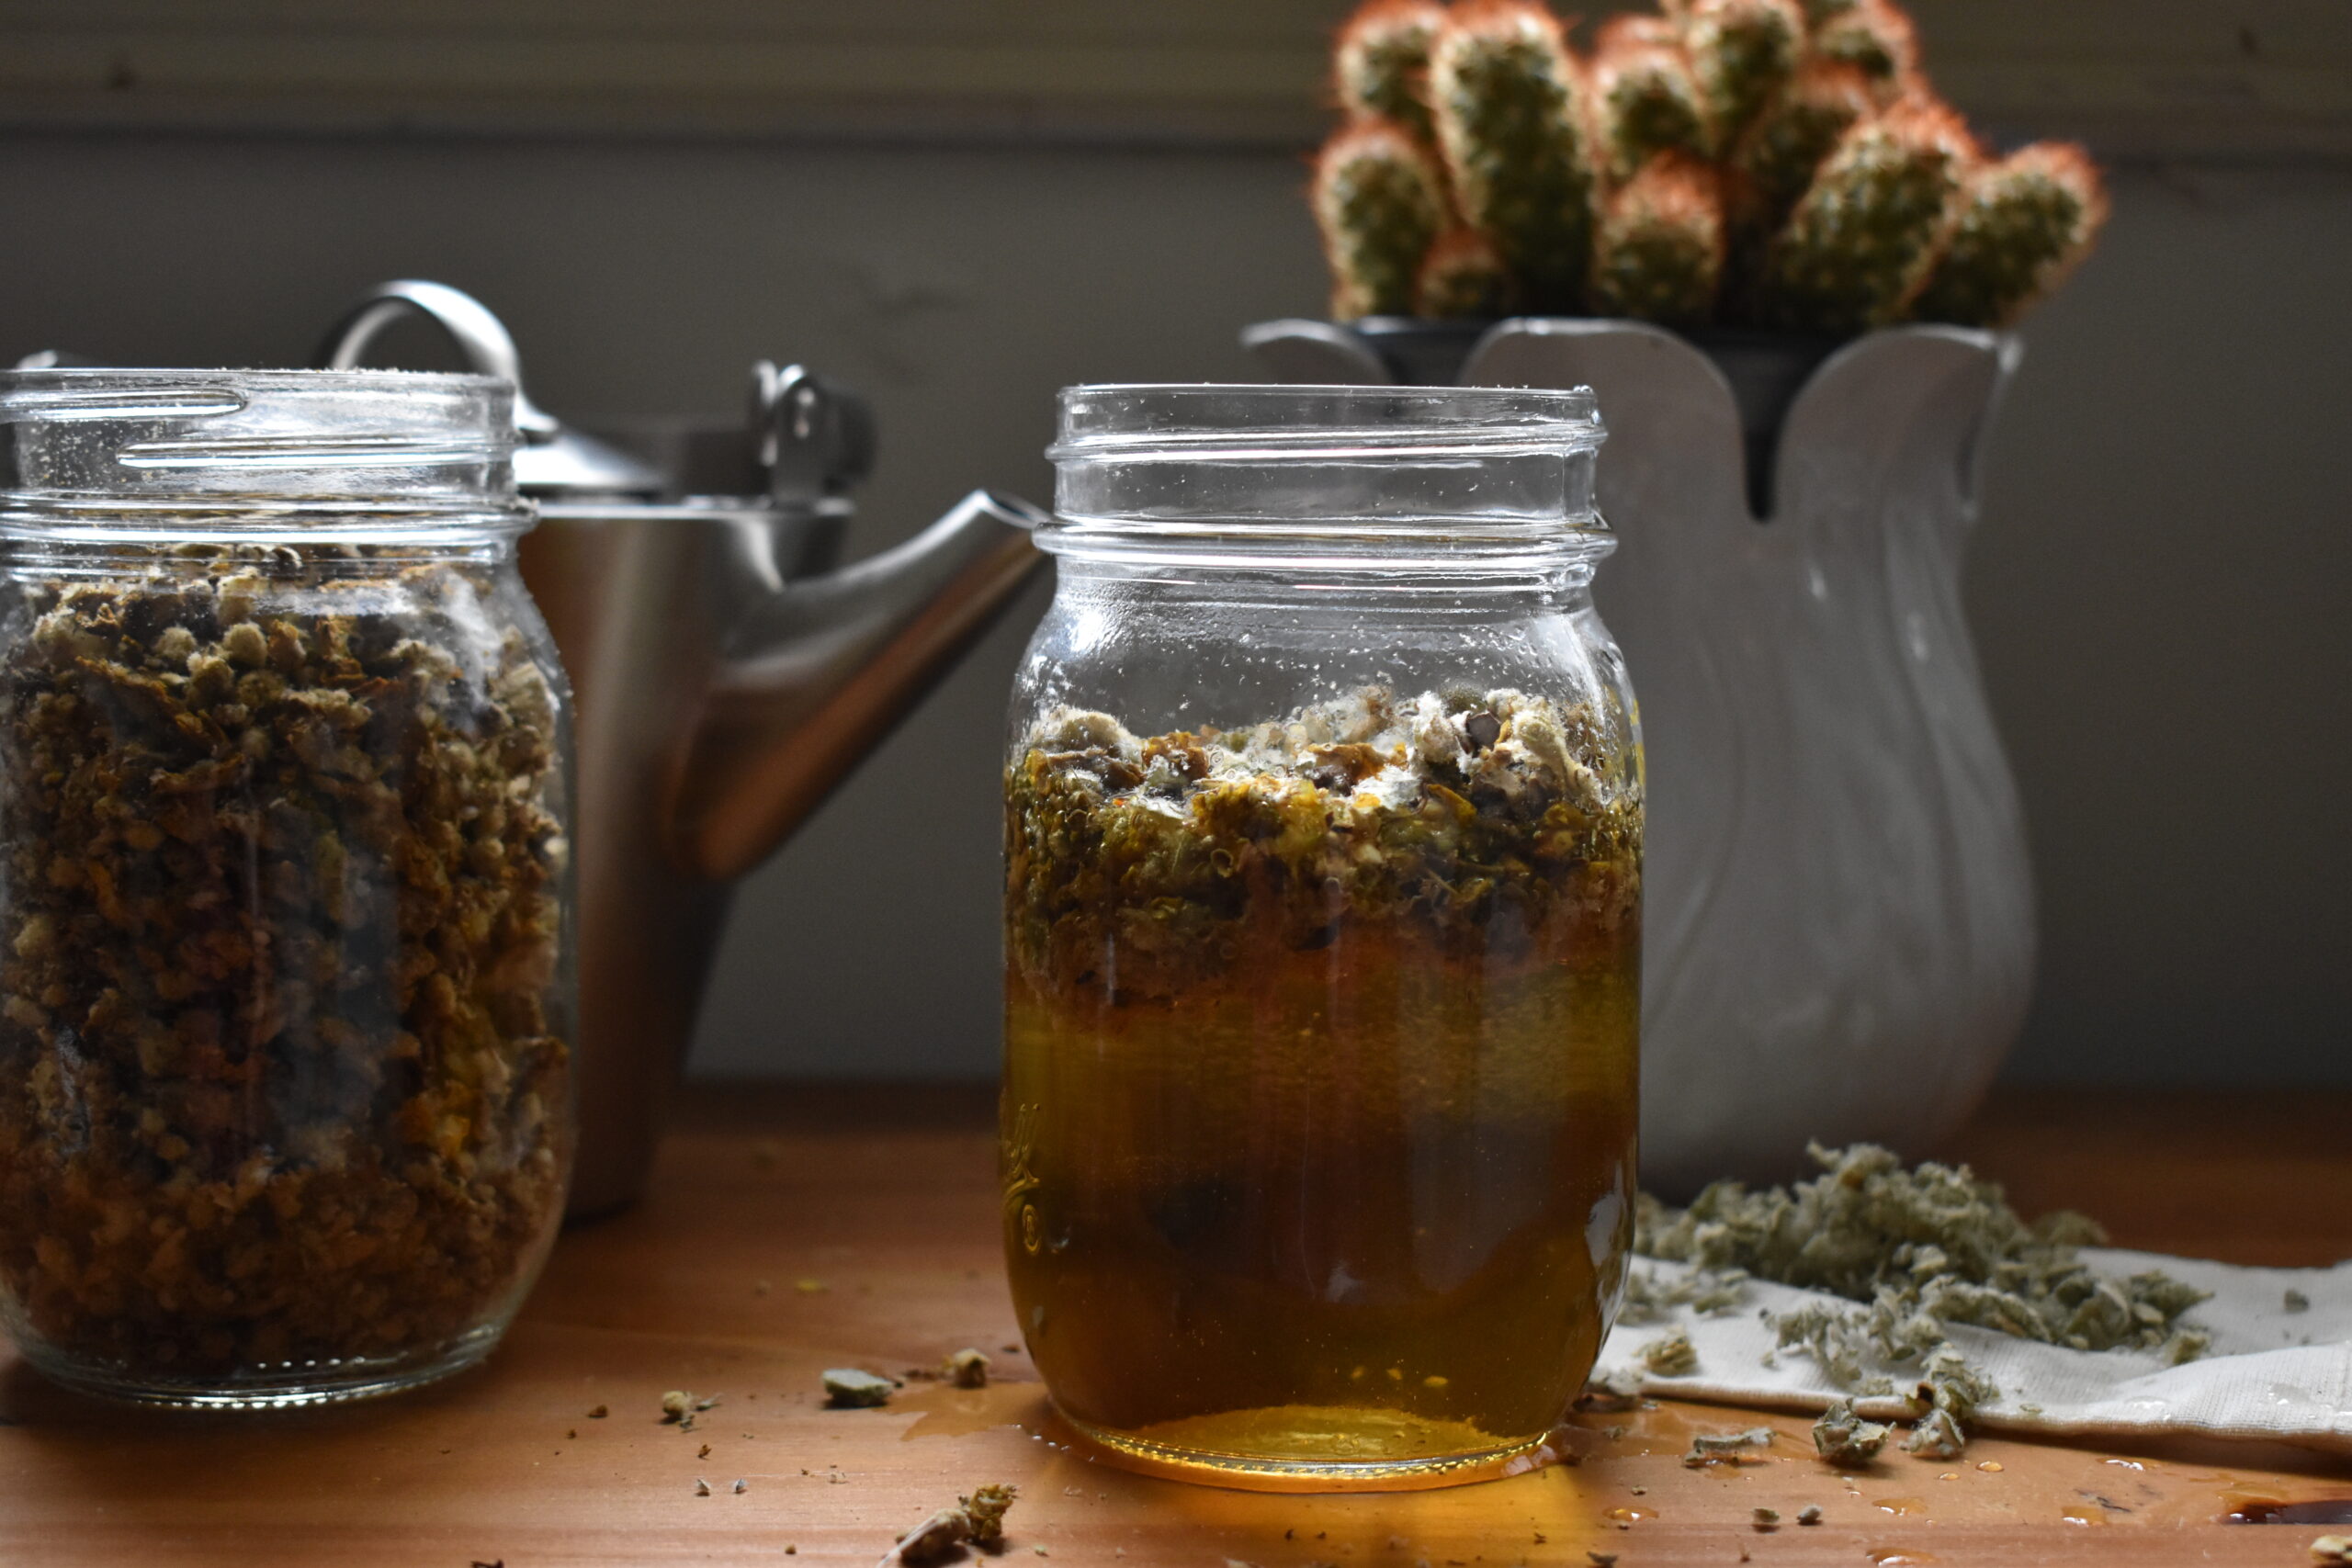 How to make mullein tea